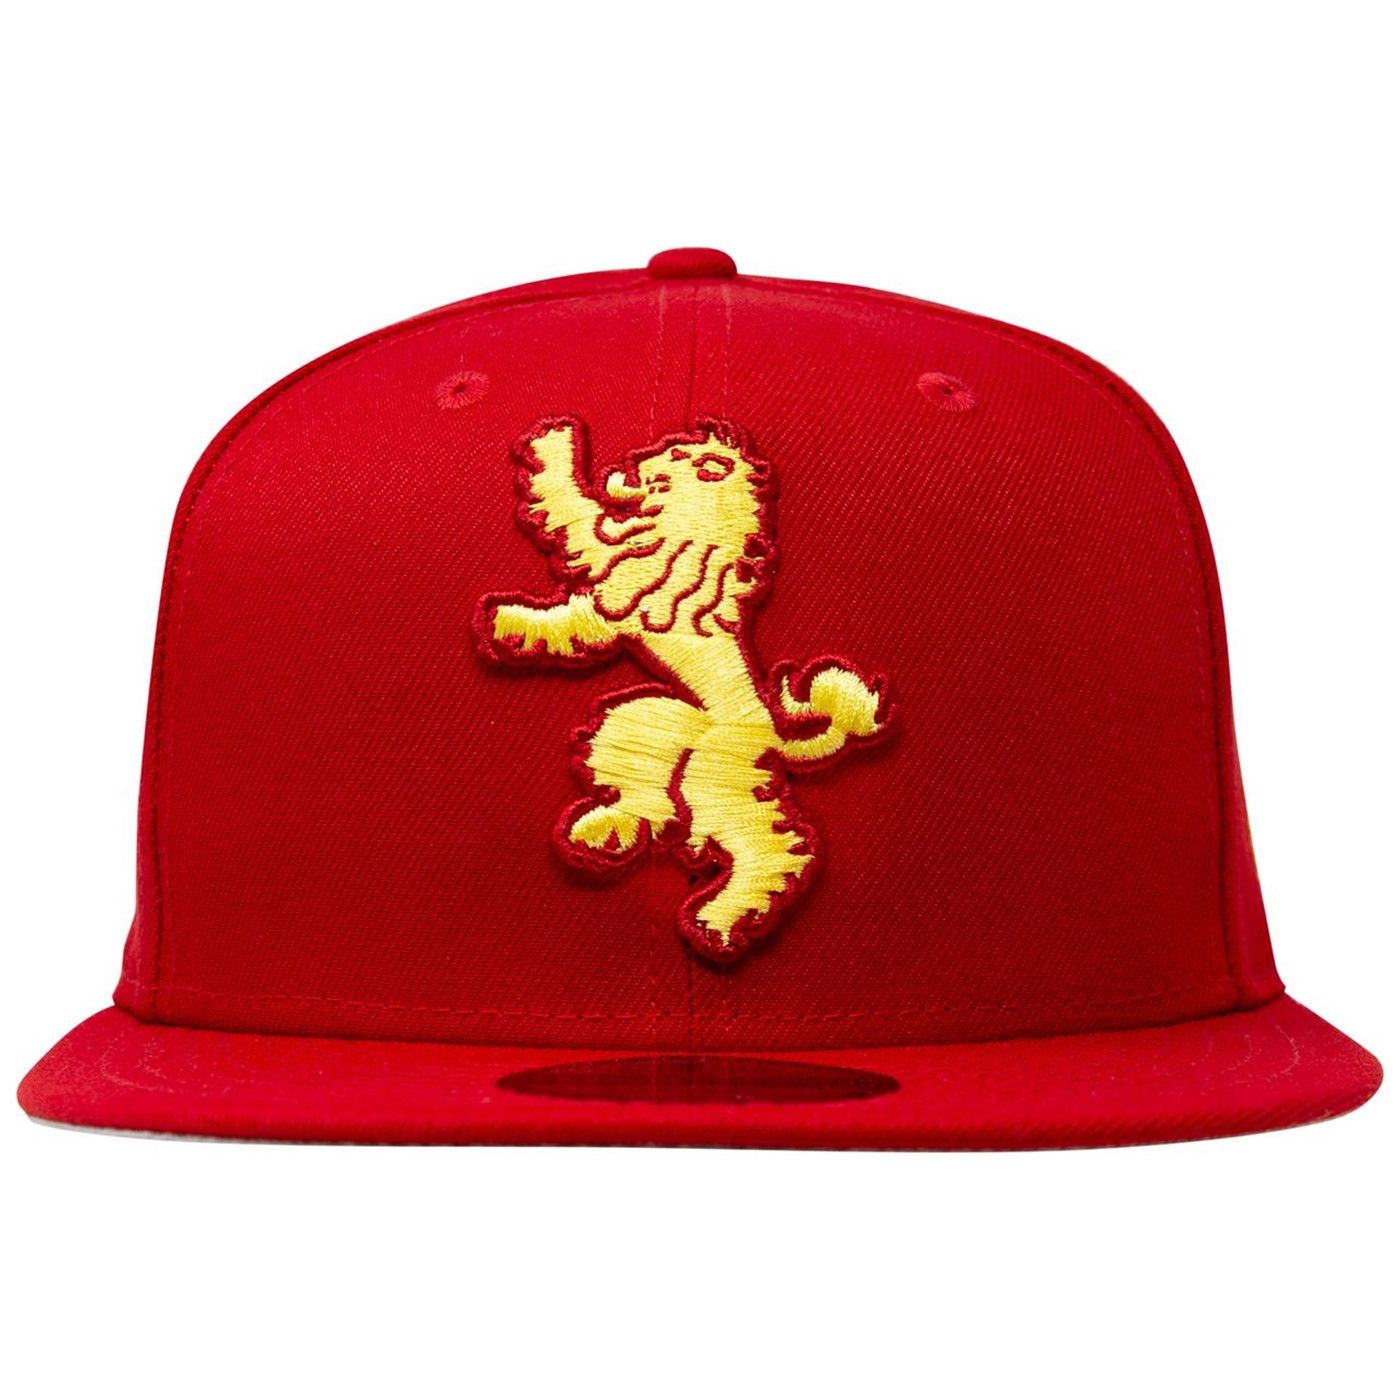 Game of Thrones House Lannister 9Fifty Adjustable New Era Hat